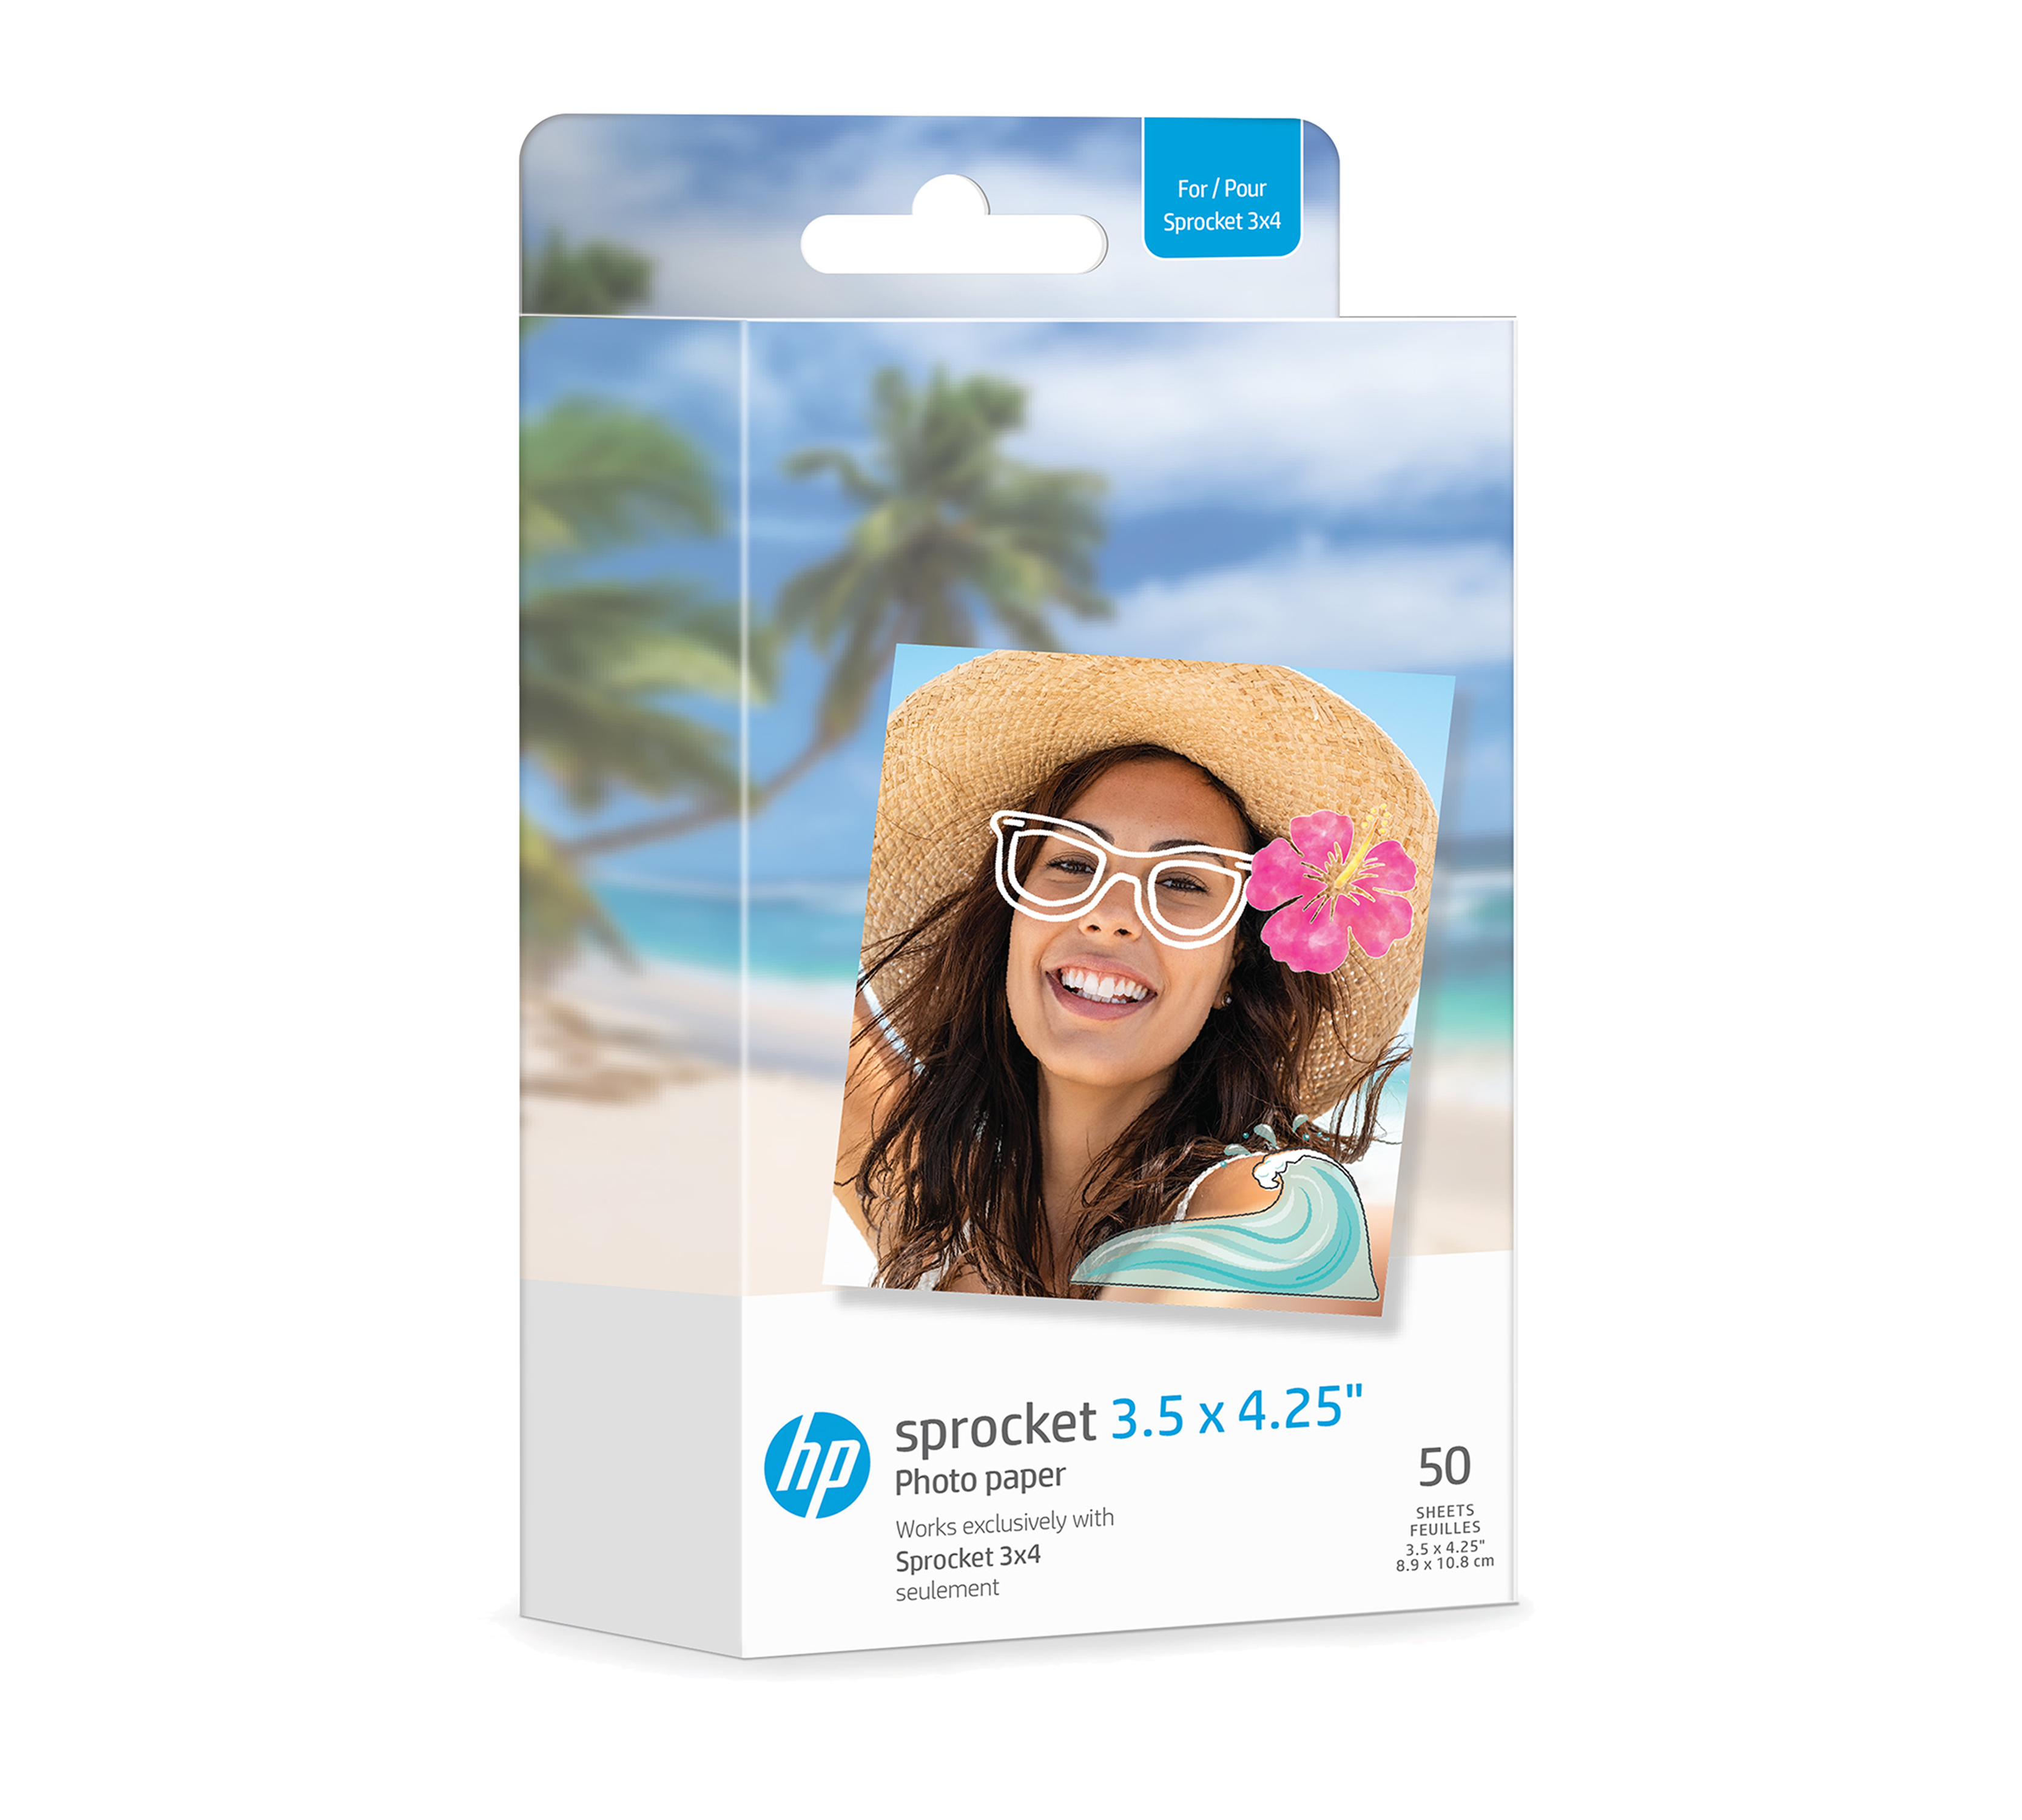 HP Sprocket 3.5 x 4.25” Zink Sticky-backed Photo Paper (50 Pack) Compatible with HP Sprocket 3x4 Photo Printer Sprocket Printers